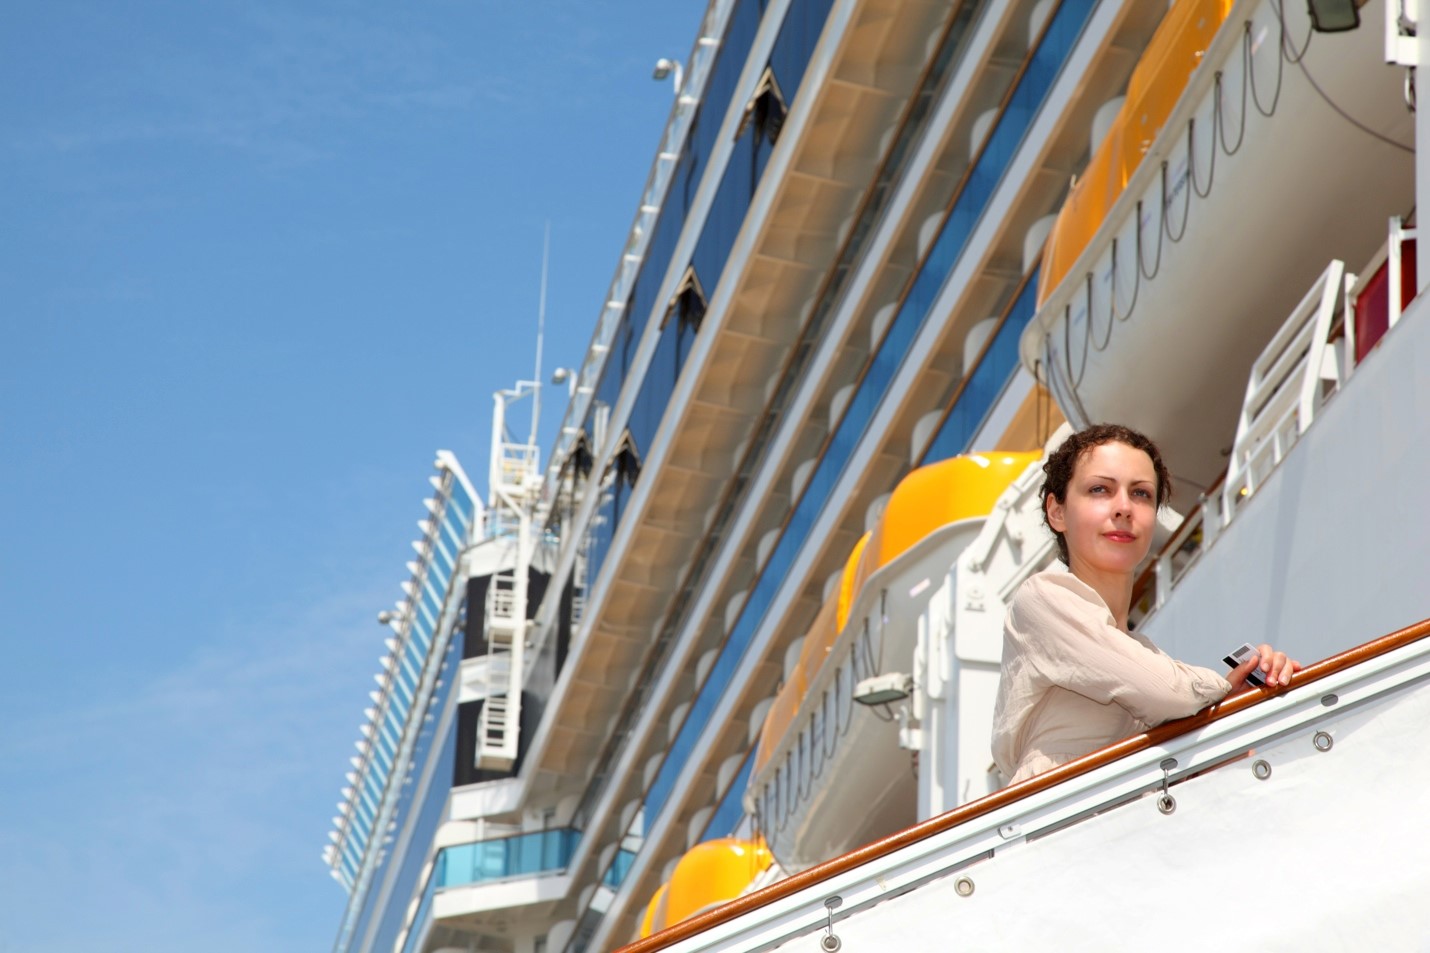 Despite Laws Being Constantly in Flux, Cruise Lines Have a Duty of Care